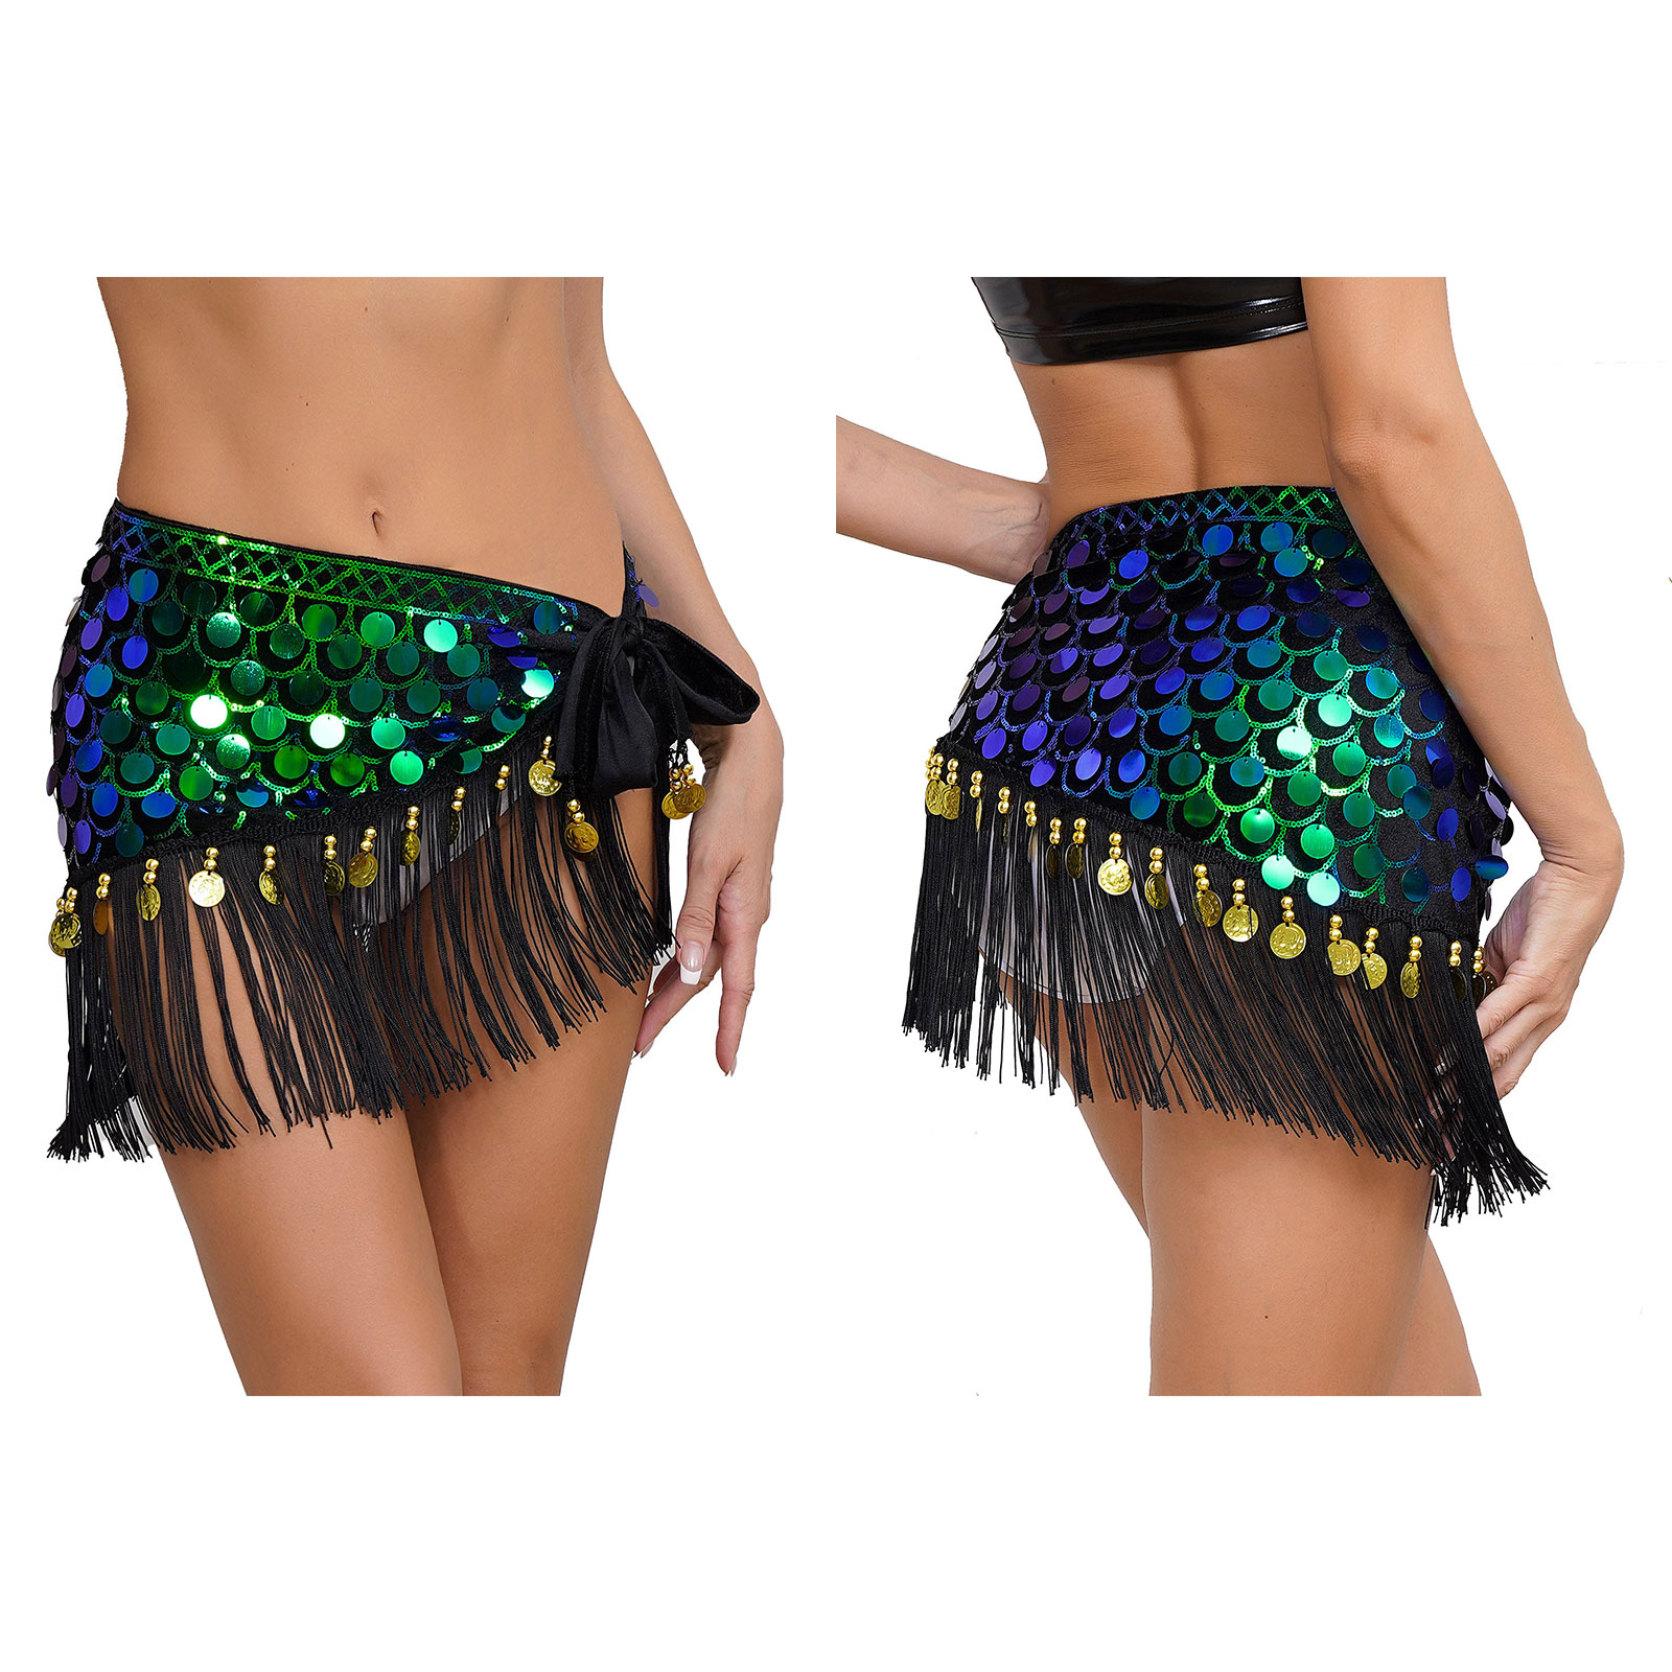 Yunduantong-electronic Women Belly Dance Lace-up Hip Skirt Fishscale Sequin Beads Fringe Hem Hip Scarf Wrap Festival Dance Stage Performance Costumes